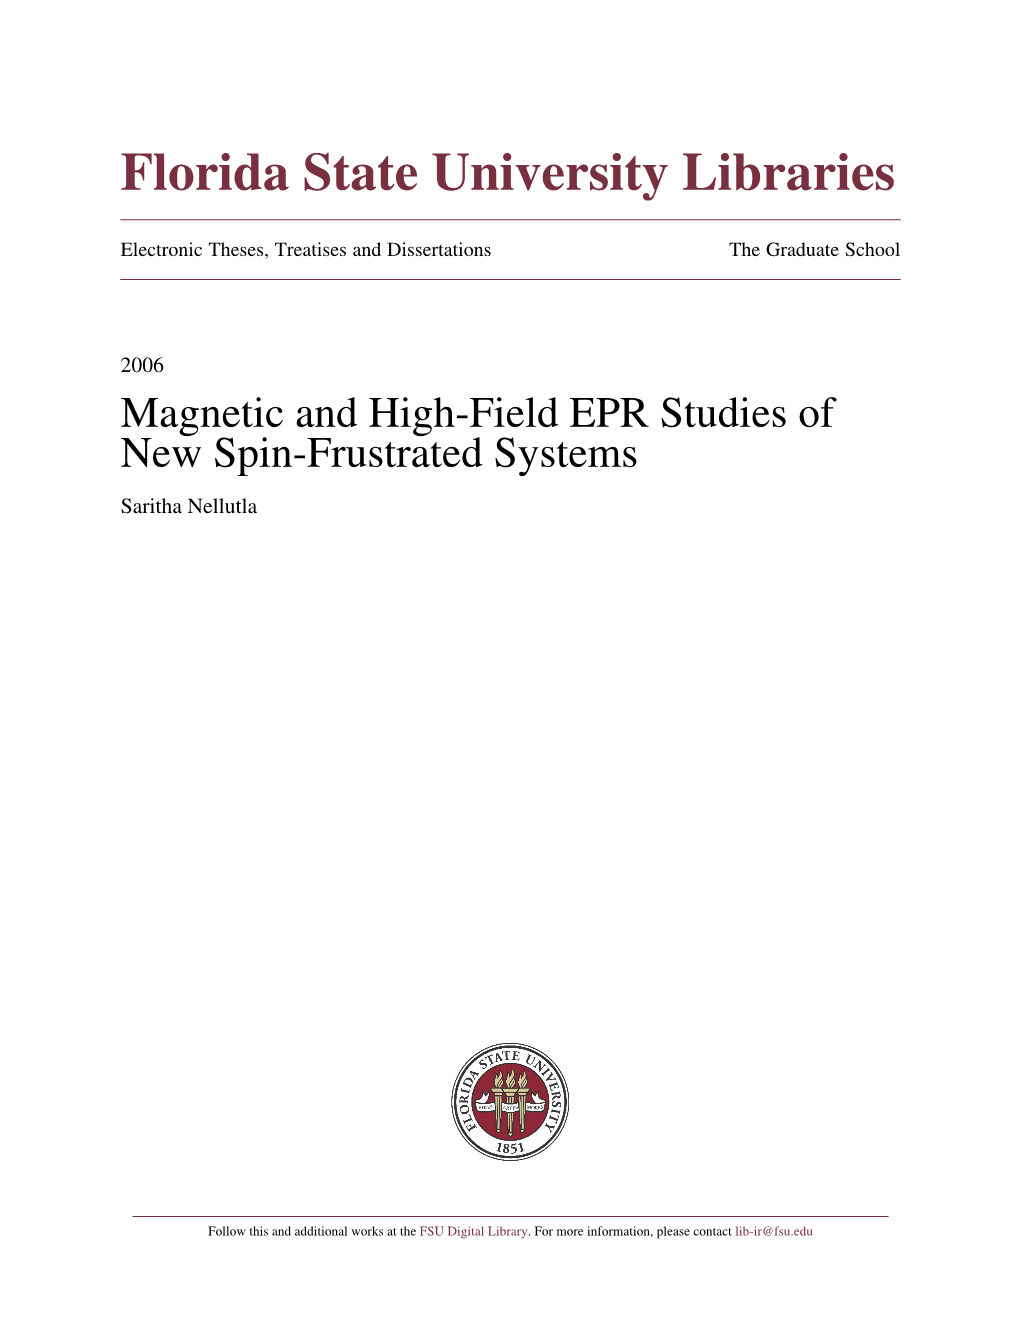 Magnetic and High-Field EPR Studies of New Spin-Frustrated Systems Saritha Nellutla